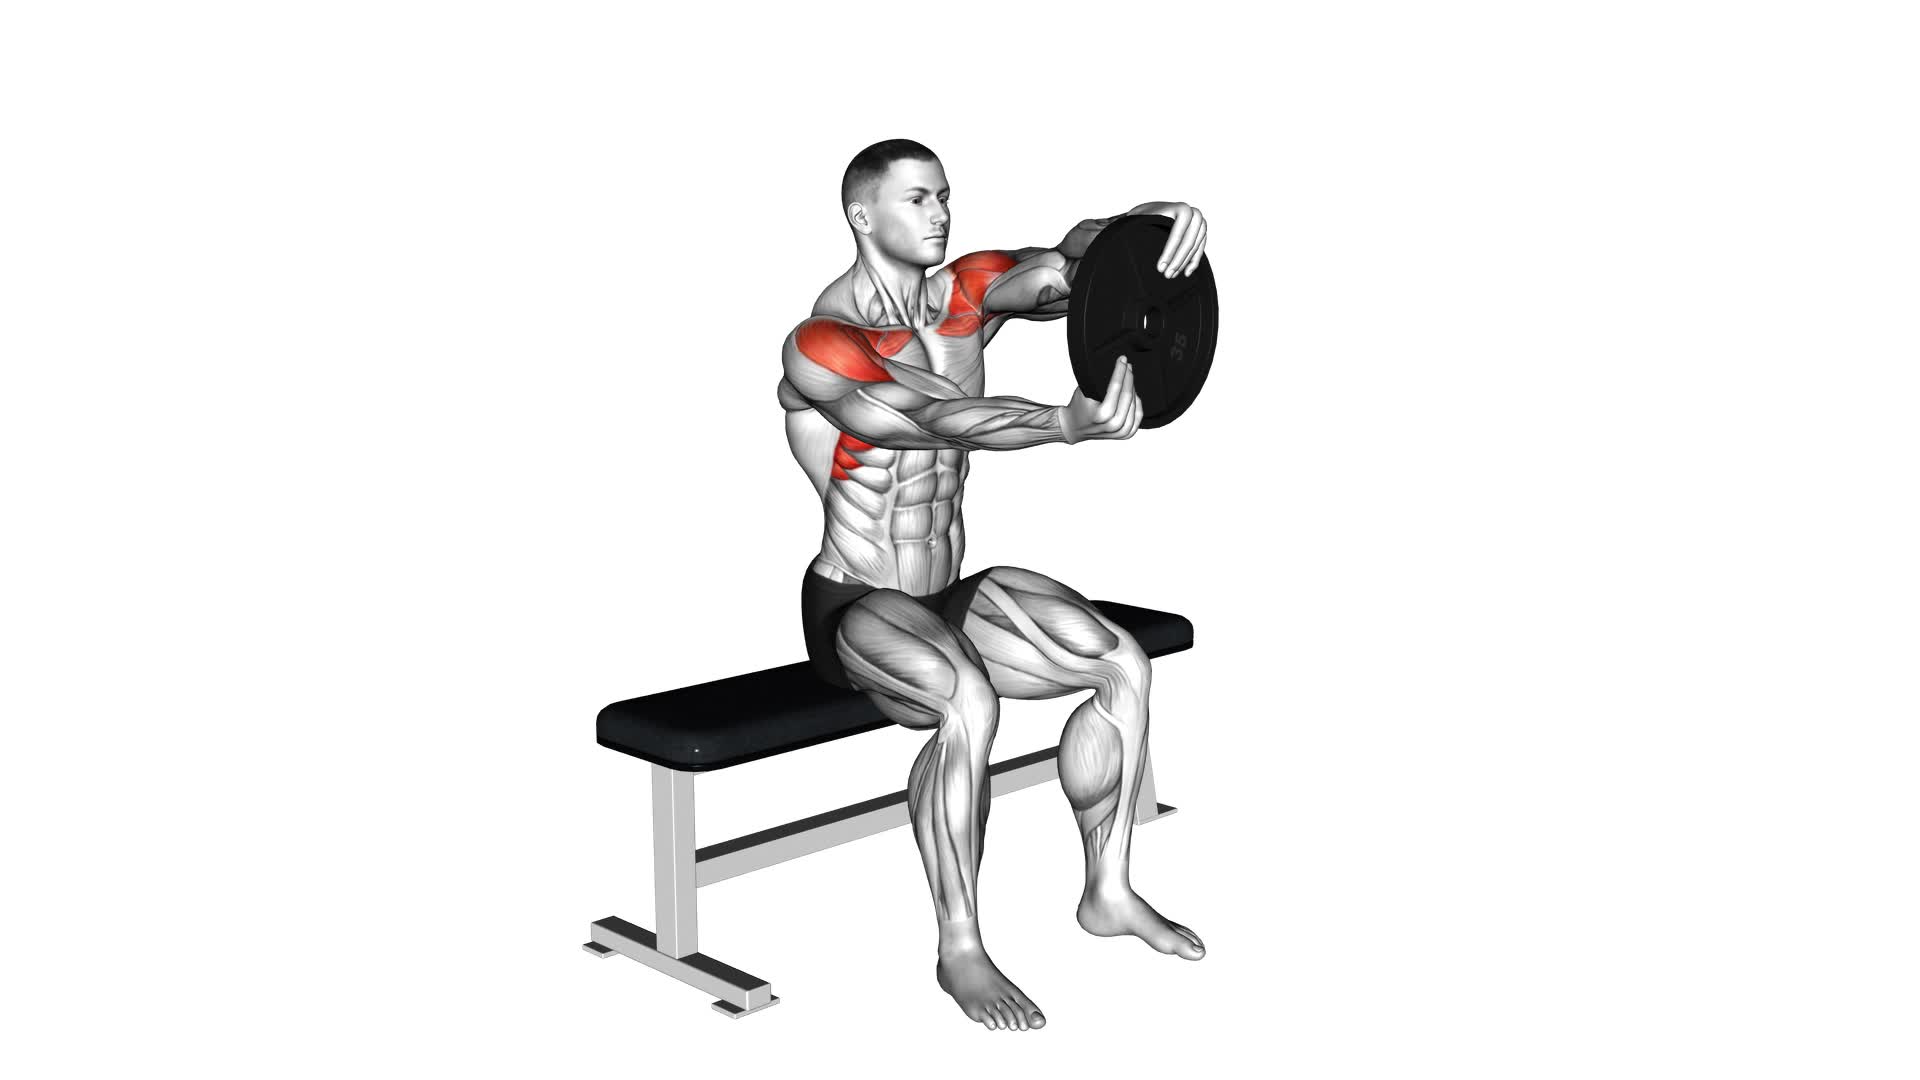 Weighted Seated Plate Driver (male) - Video Exercise Guide & Tips